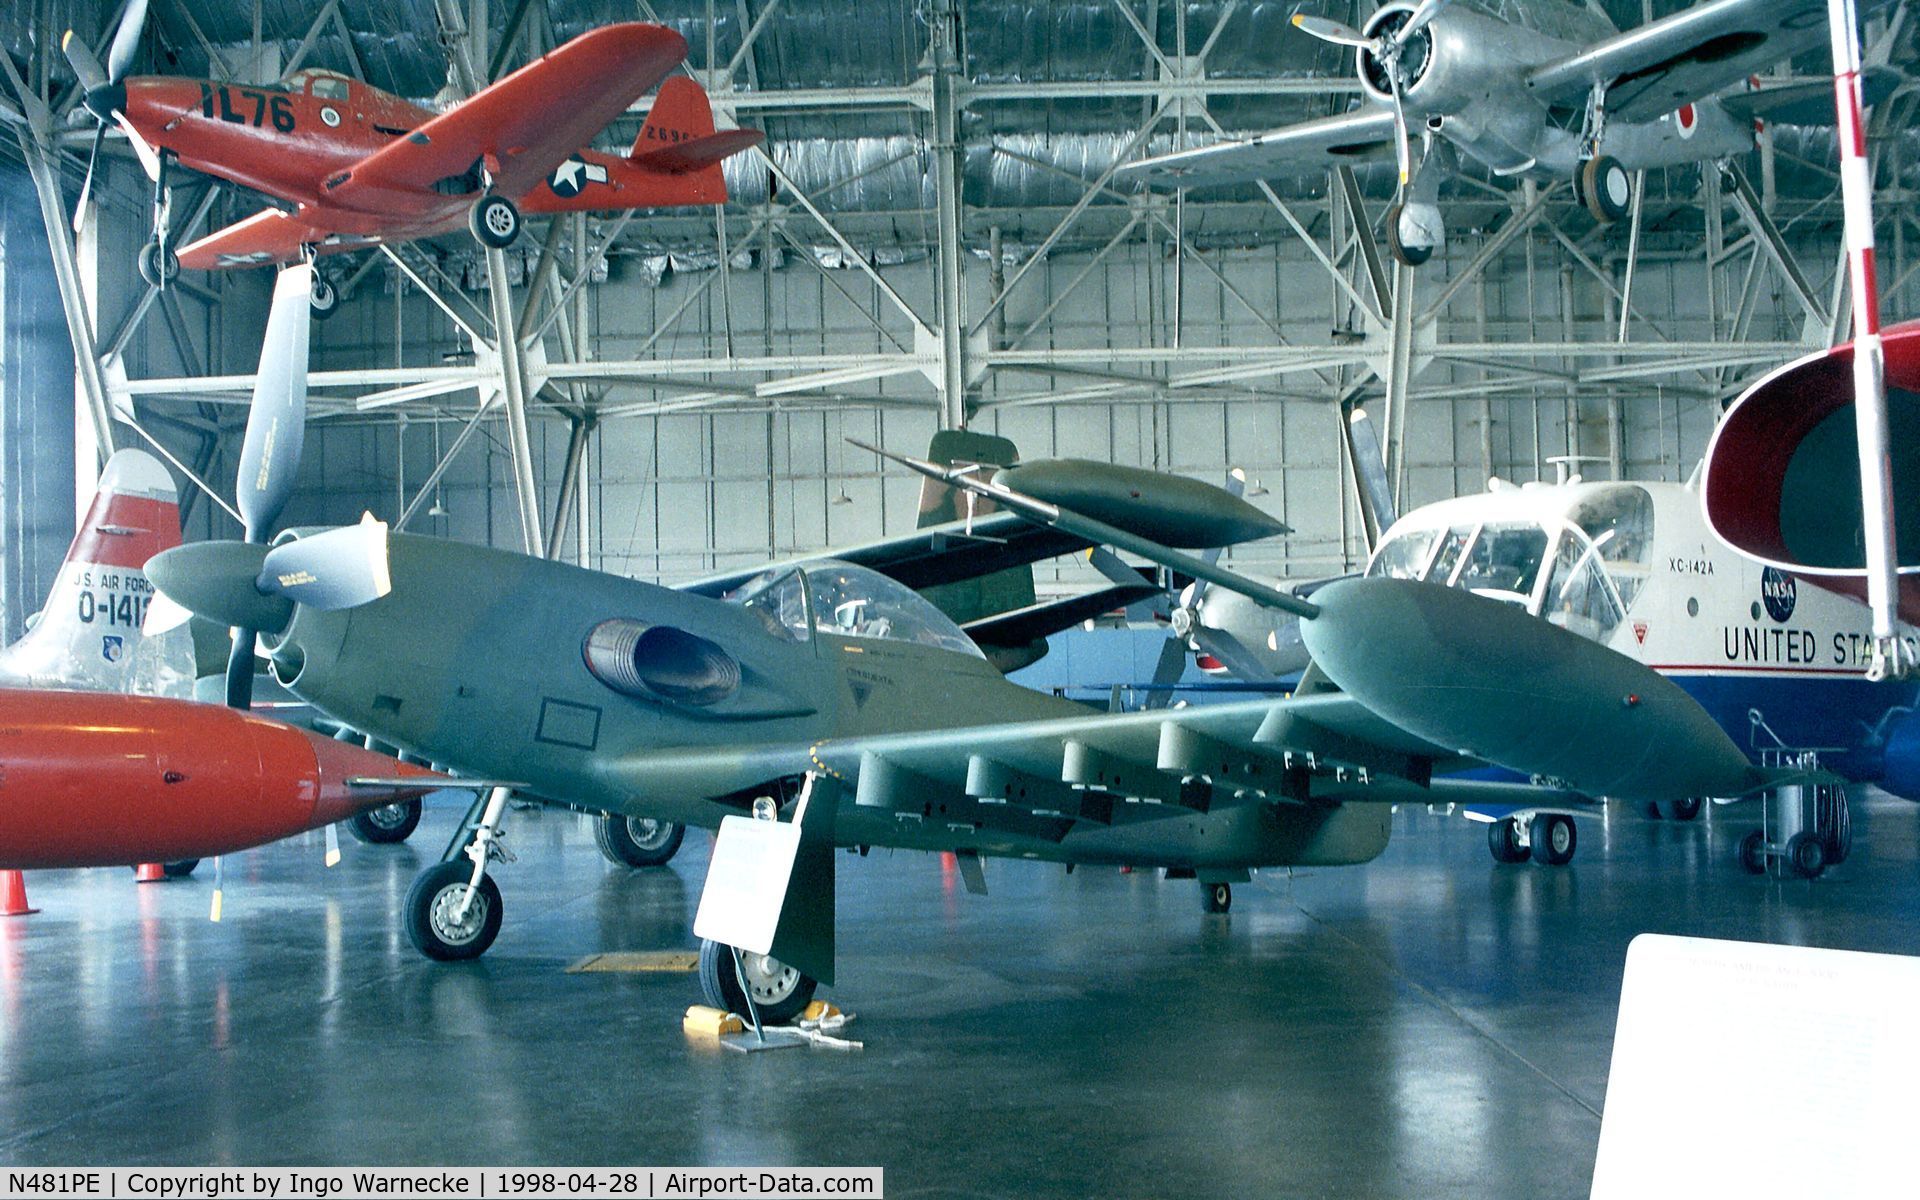 N481PE, 1983 Piper PA-48 Enforcer C/N 48-8301001, Piper PA-48 Enforcer at the USAF-Museum, Dayton OH